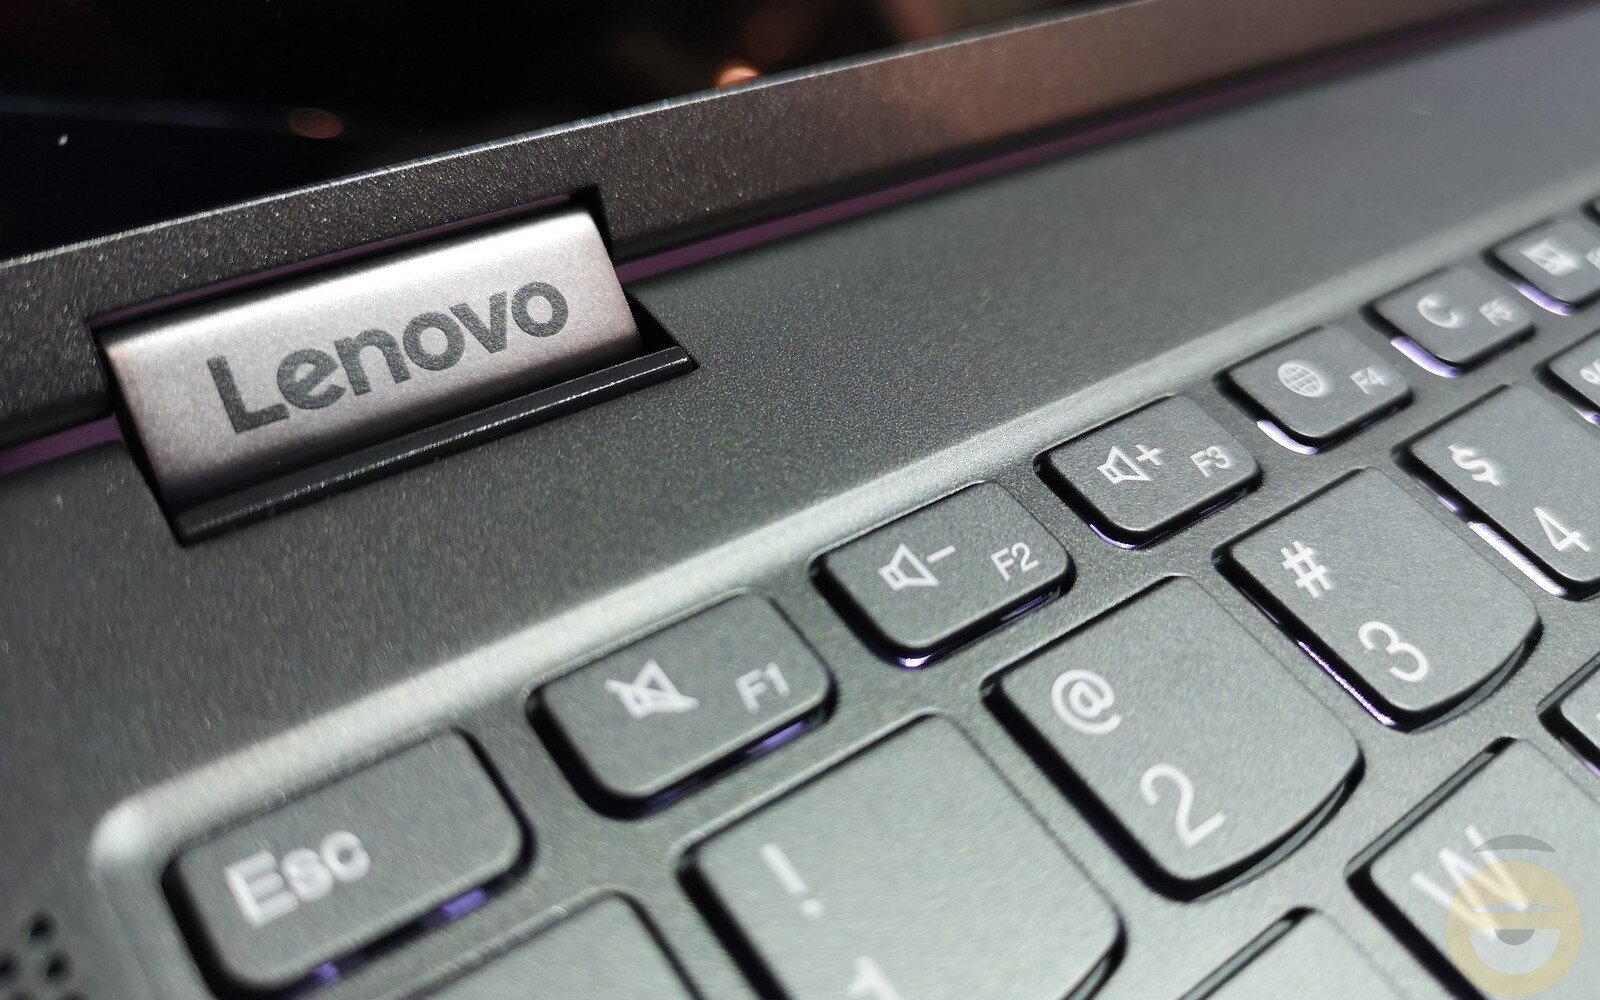 Lenovo: 4 out of 5 devices will be self-service capable by 2025 – Lenovo